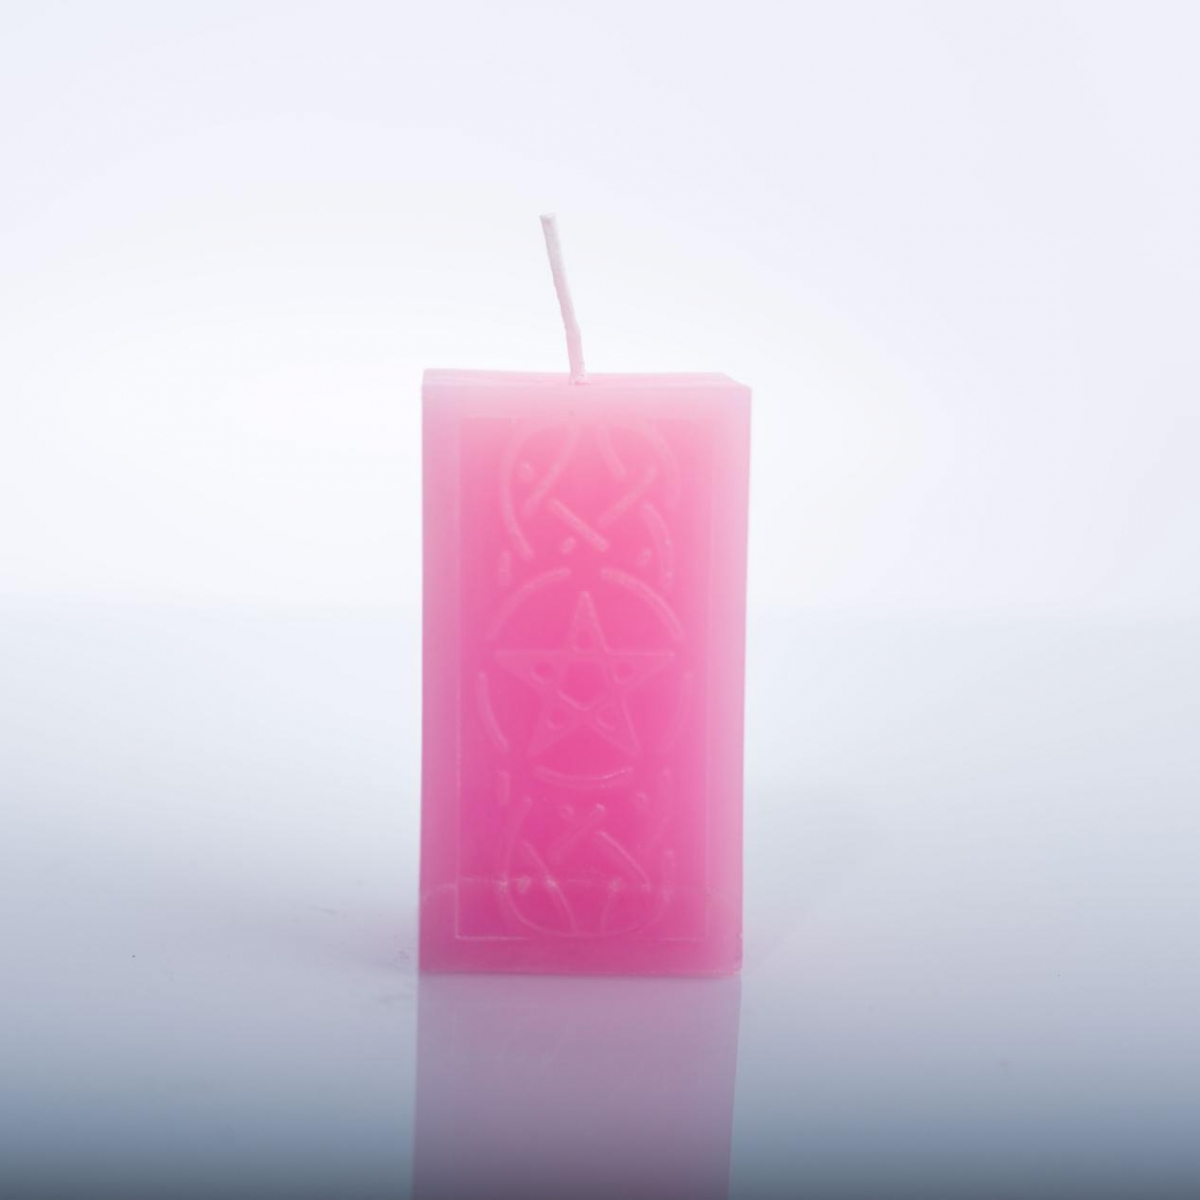 Religious Candles ：Carved Witchcraft LOGO ，Pink Cube Candle ，China Factory ，Wholesale Price-HOWCANDLE-Candles,Scented Candles,Aromatherapy Candles,Soy Candles,Vegan Candles,Jar Candles,Pillar Candles,Candle Gift Sets,Essential Oils,Reed Diffuser,Candle Holder,